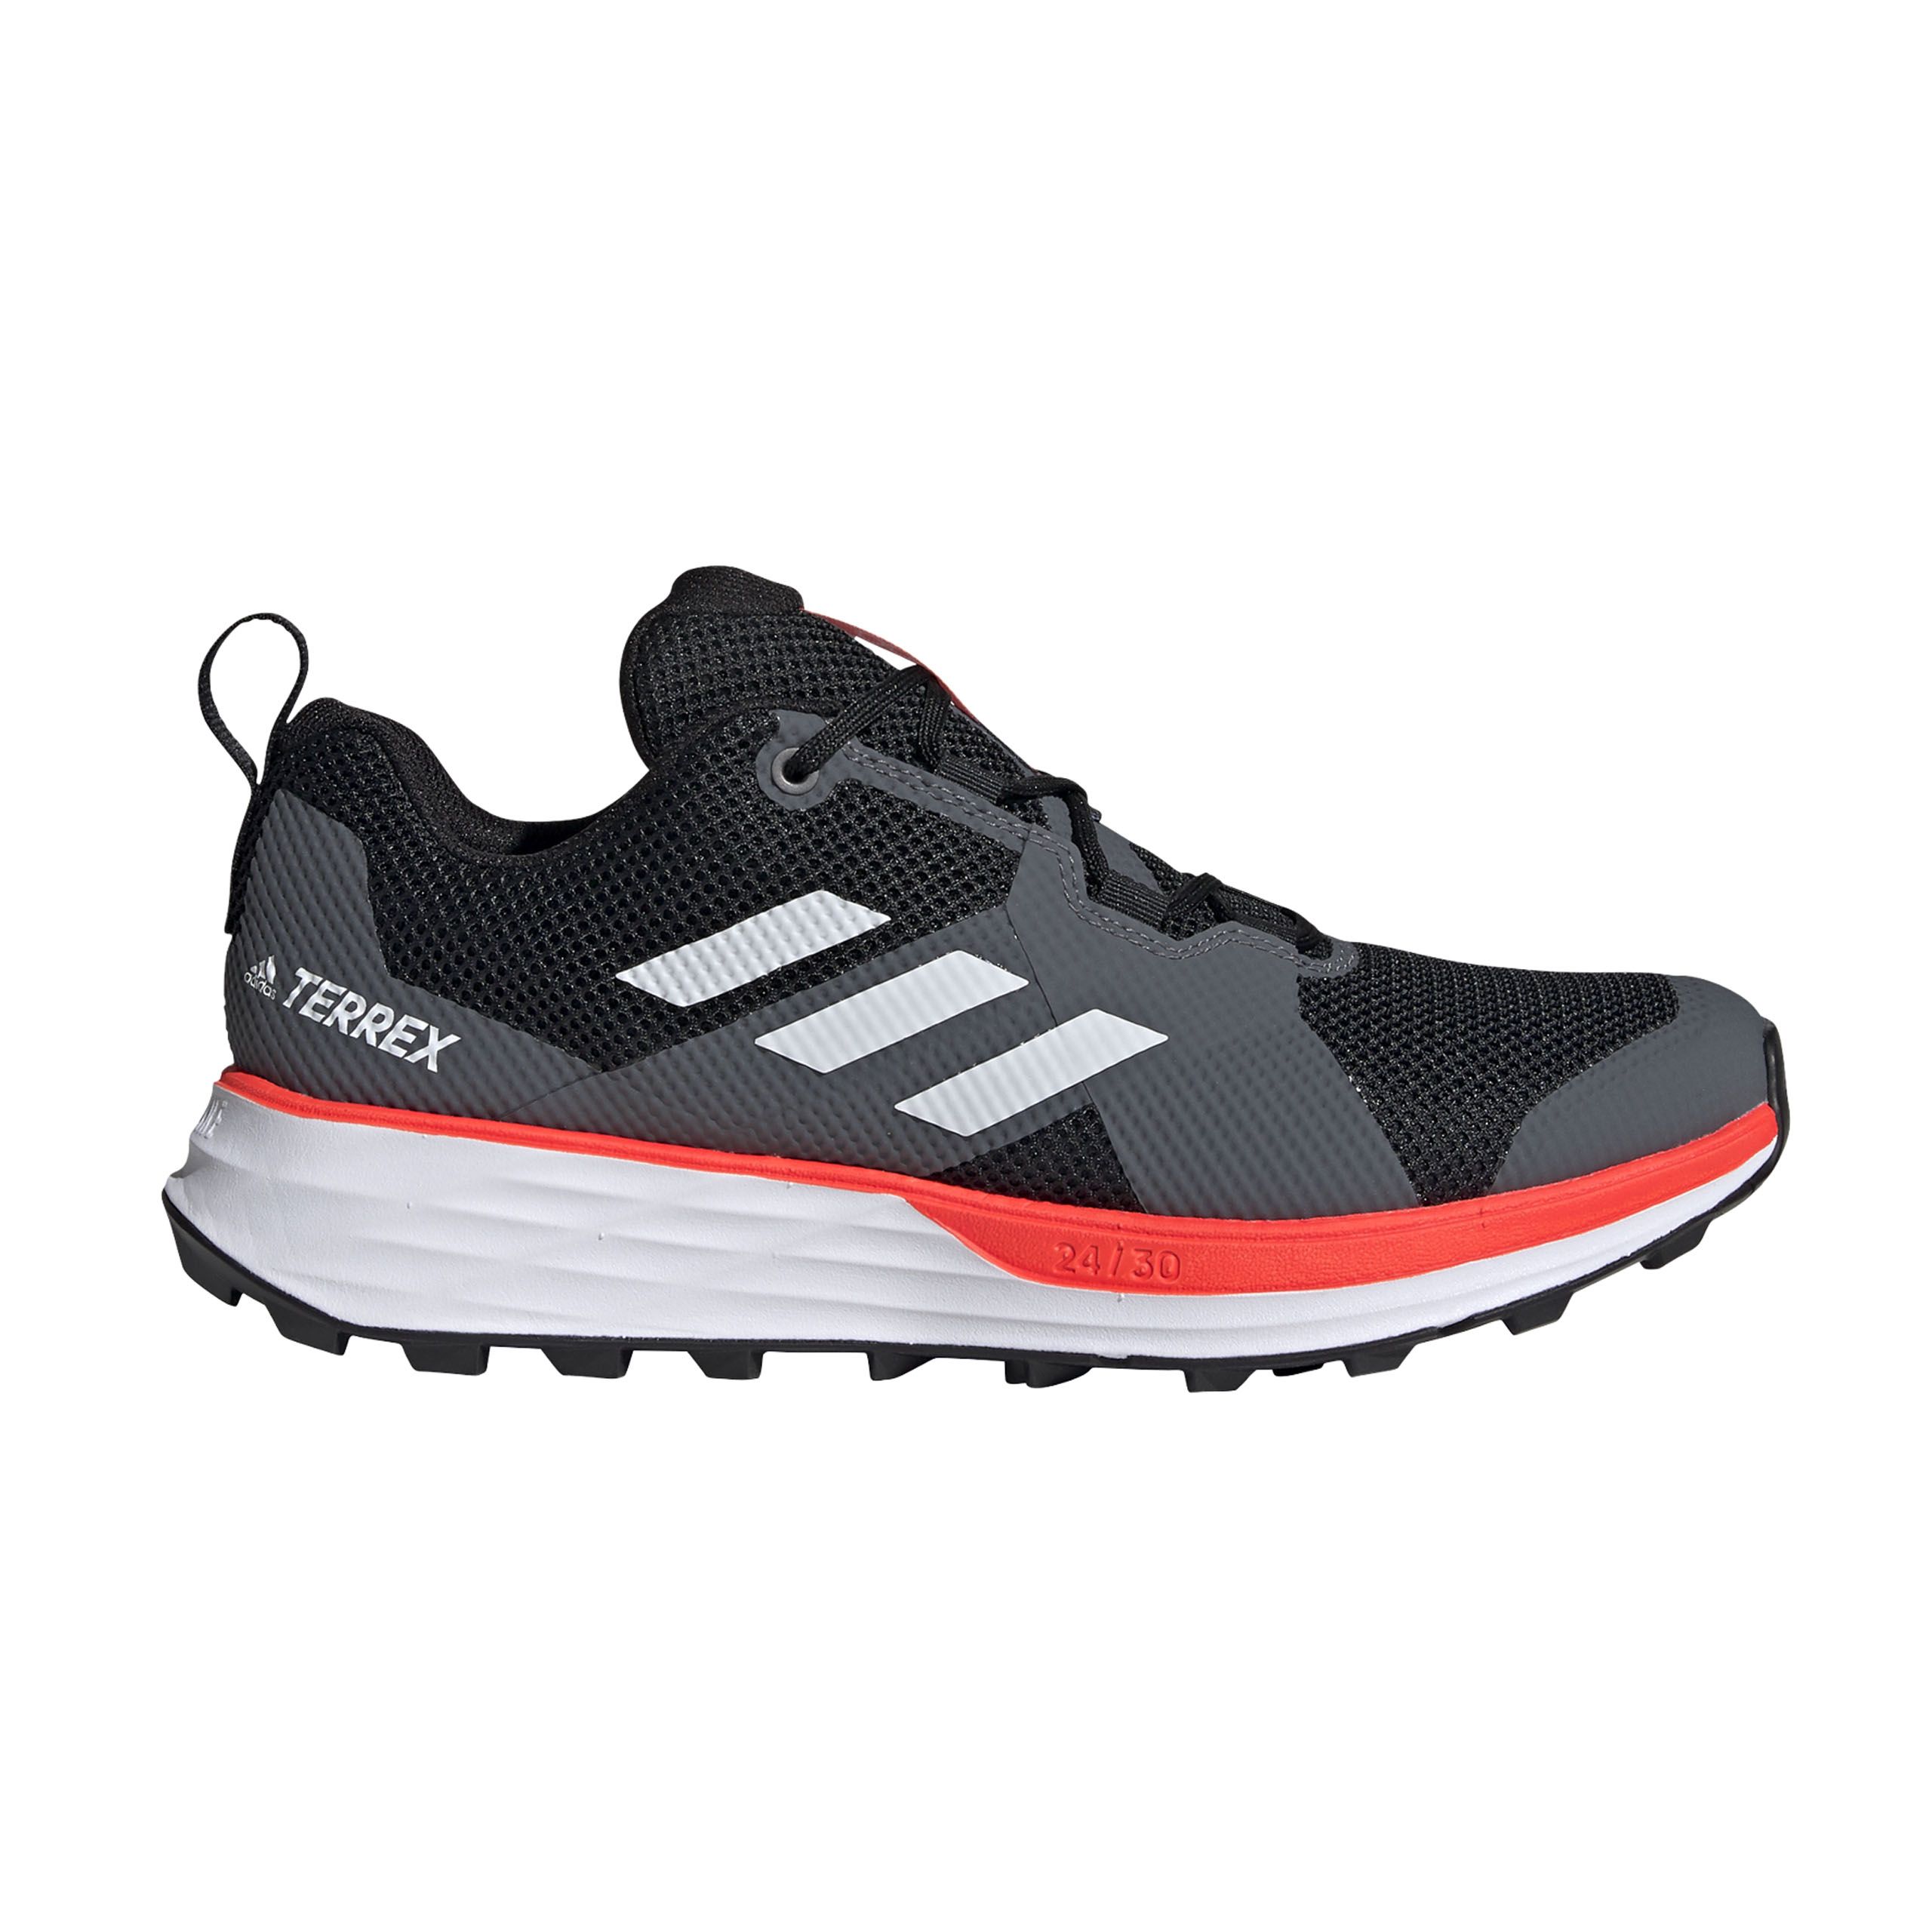 Adidas Mens Terrex Two Trail Running Shoes